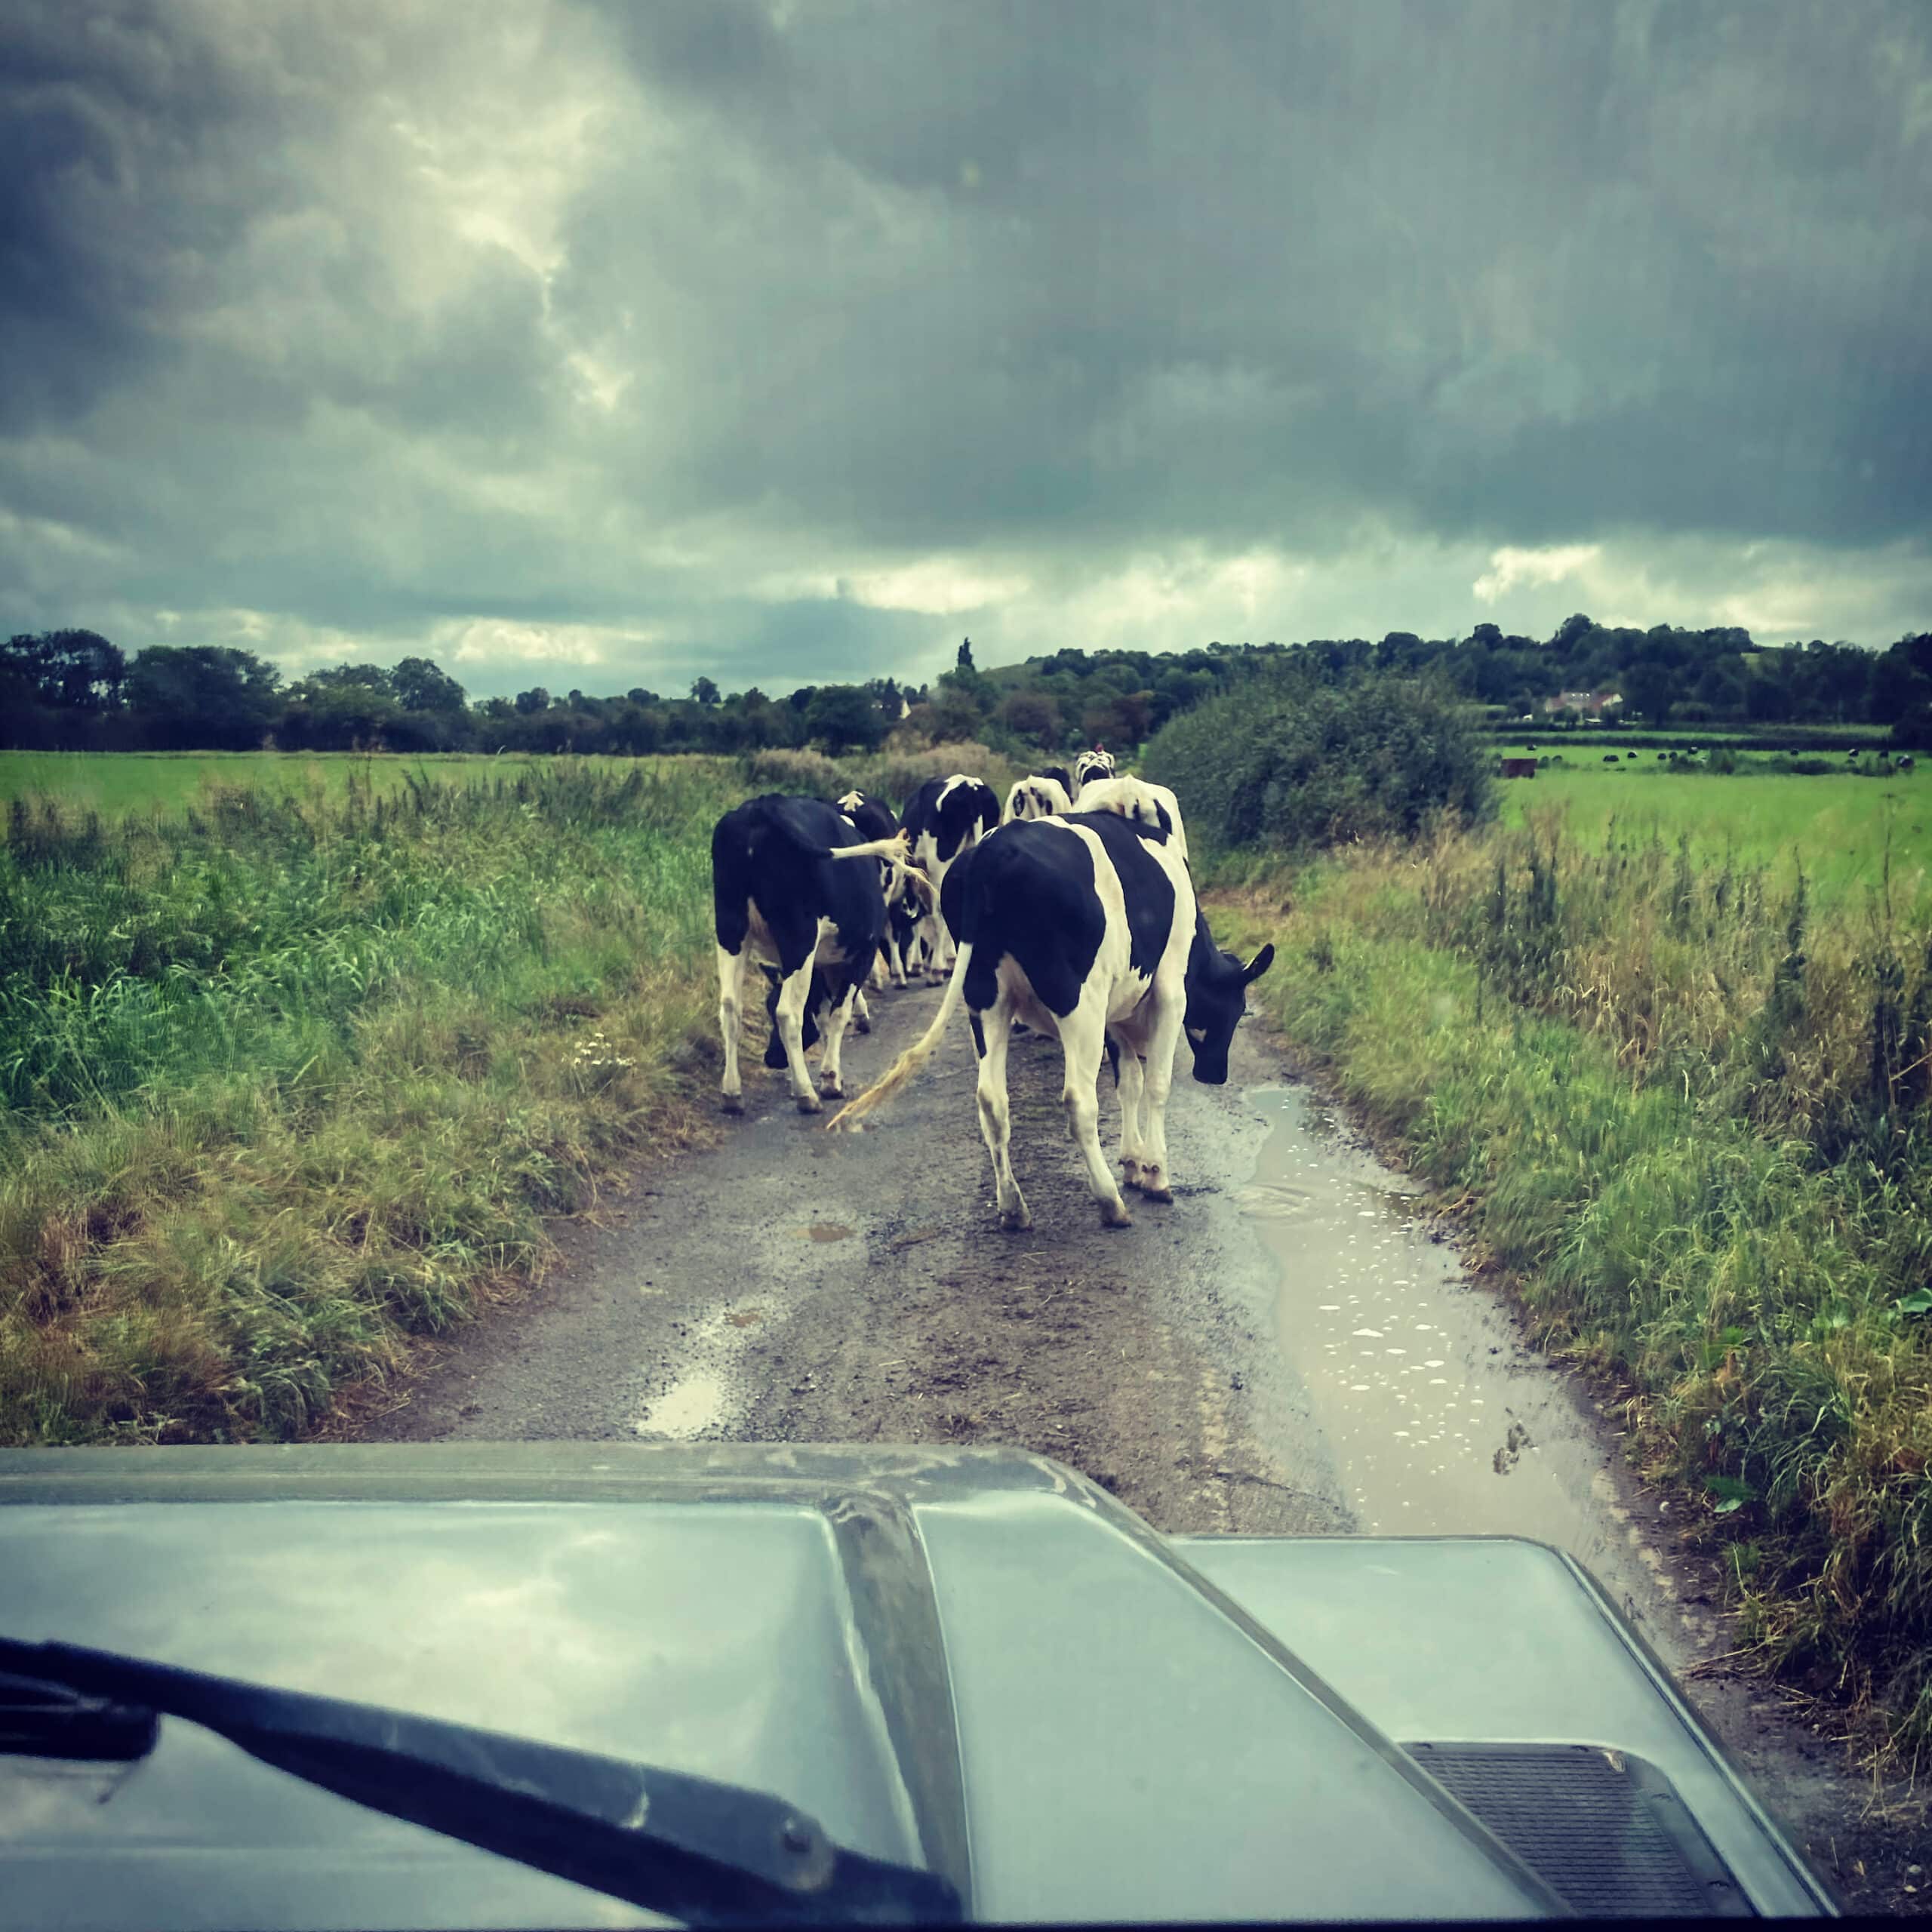 Cows walking in front of land rover